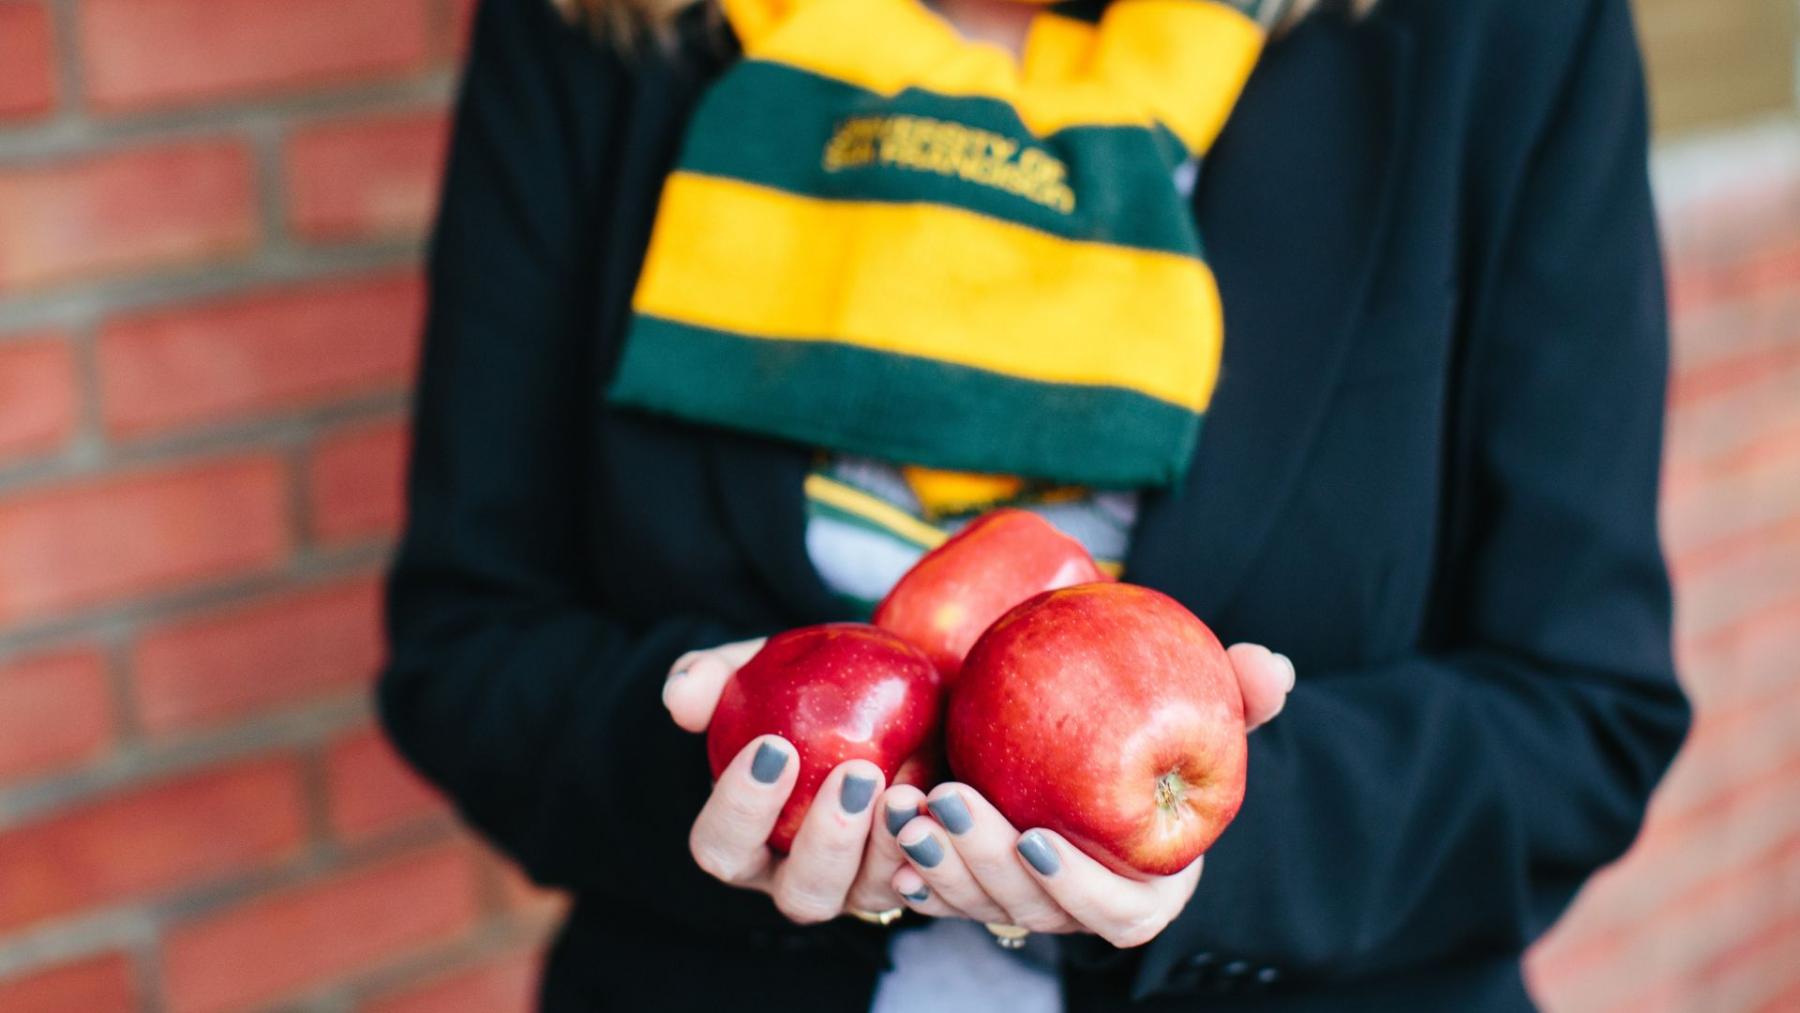 Student presenting three apples in hands